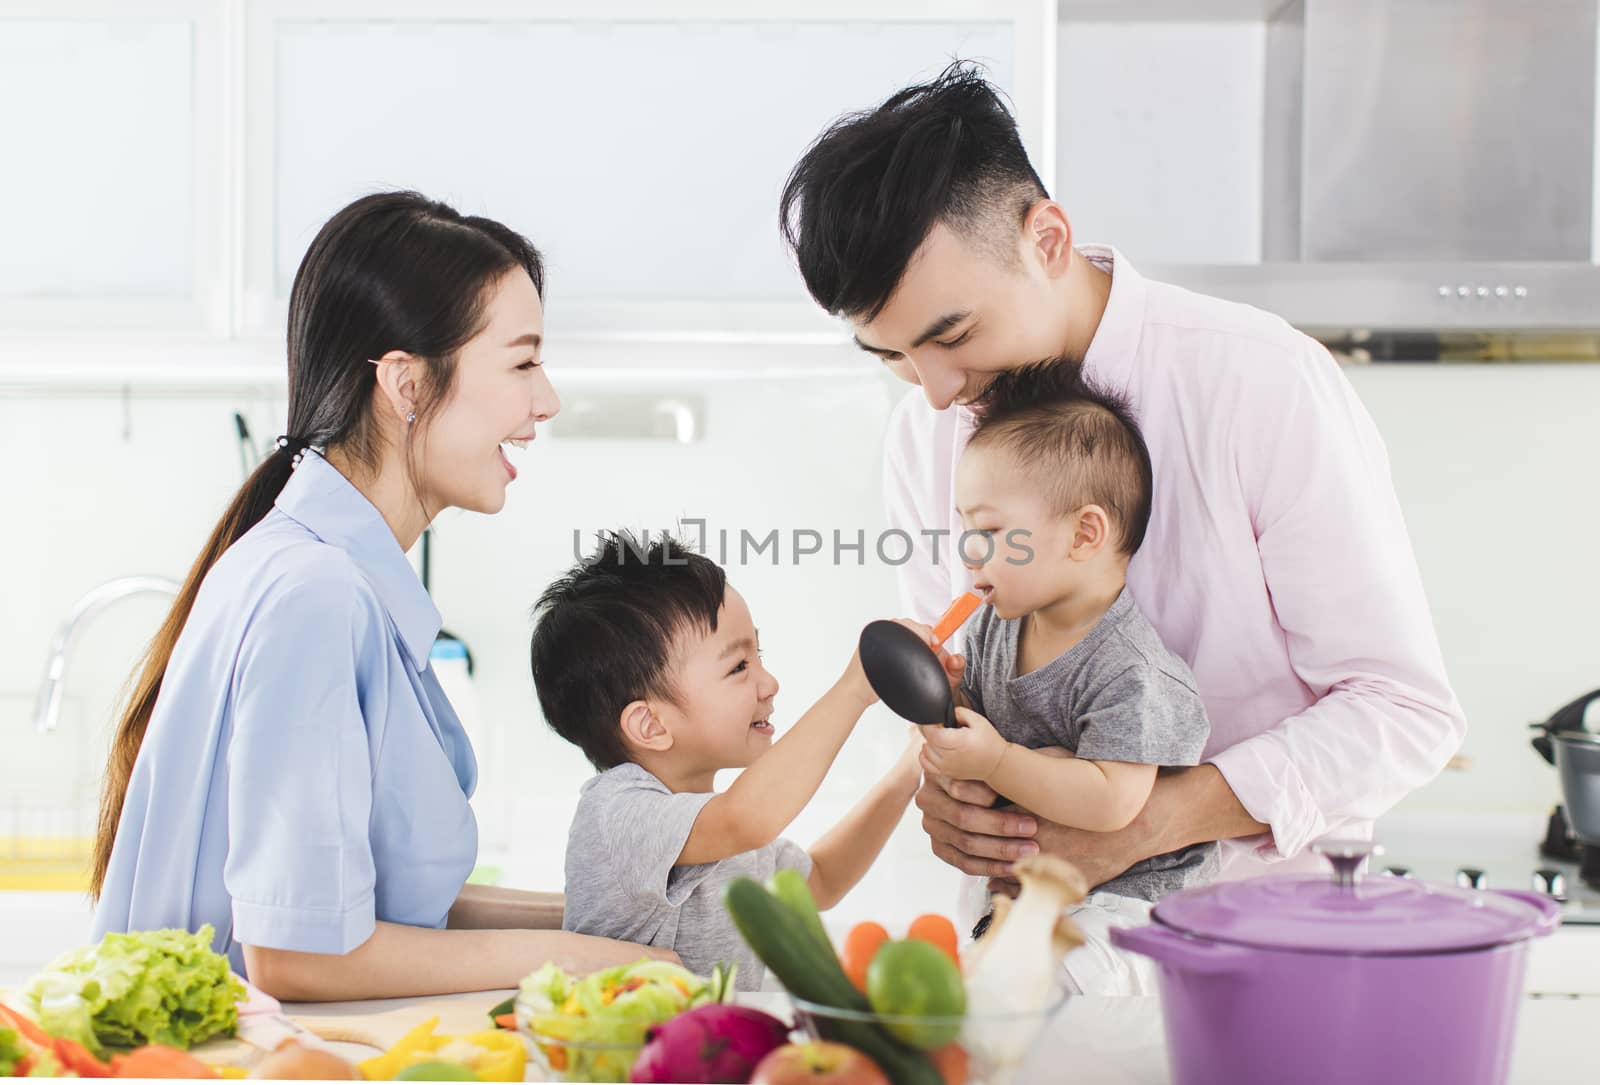 parent and boy feeding son a piece of carrot in kitchen by tomwang